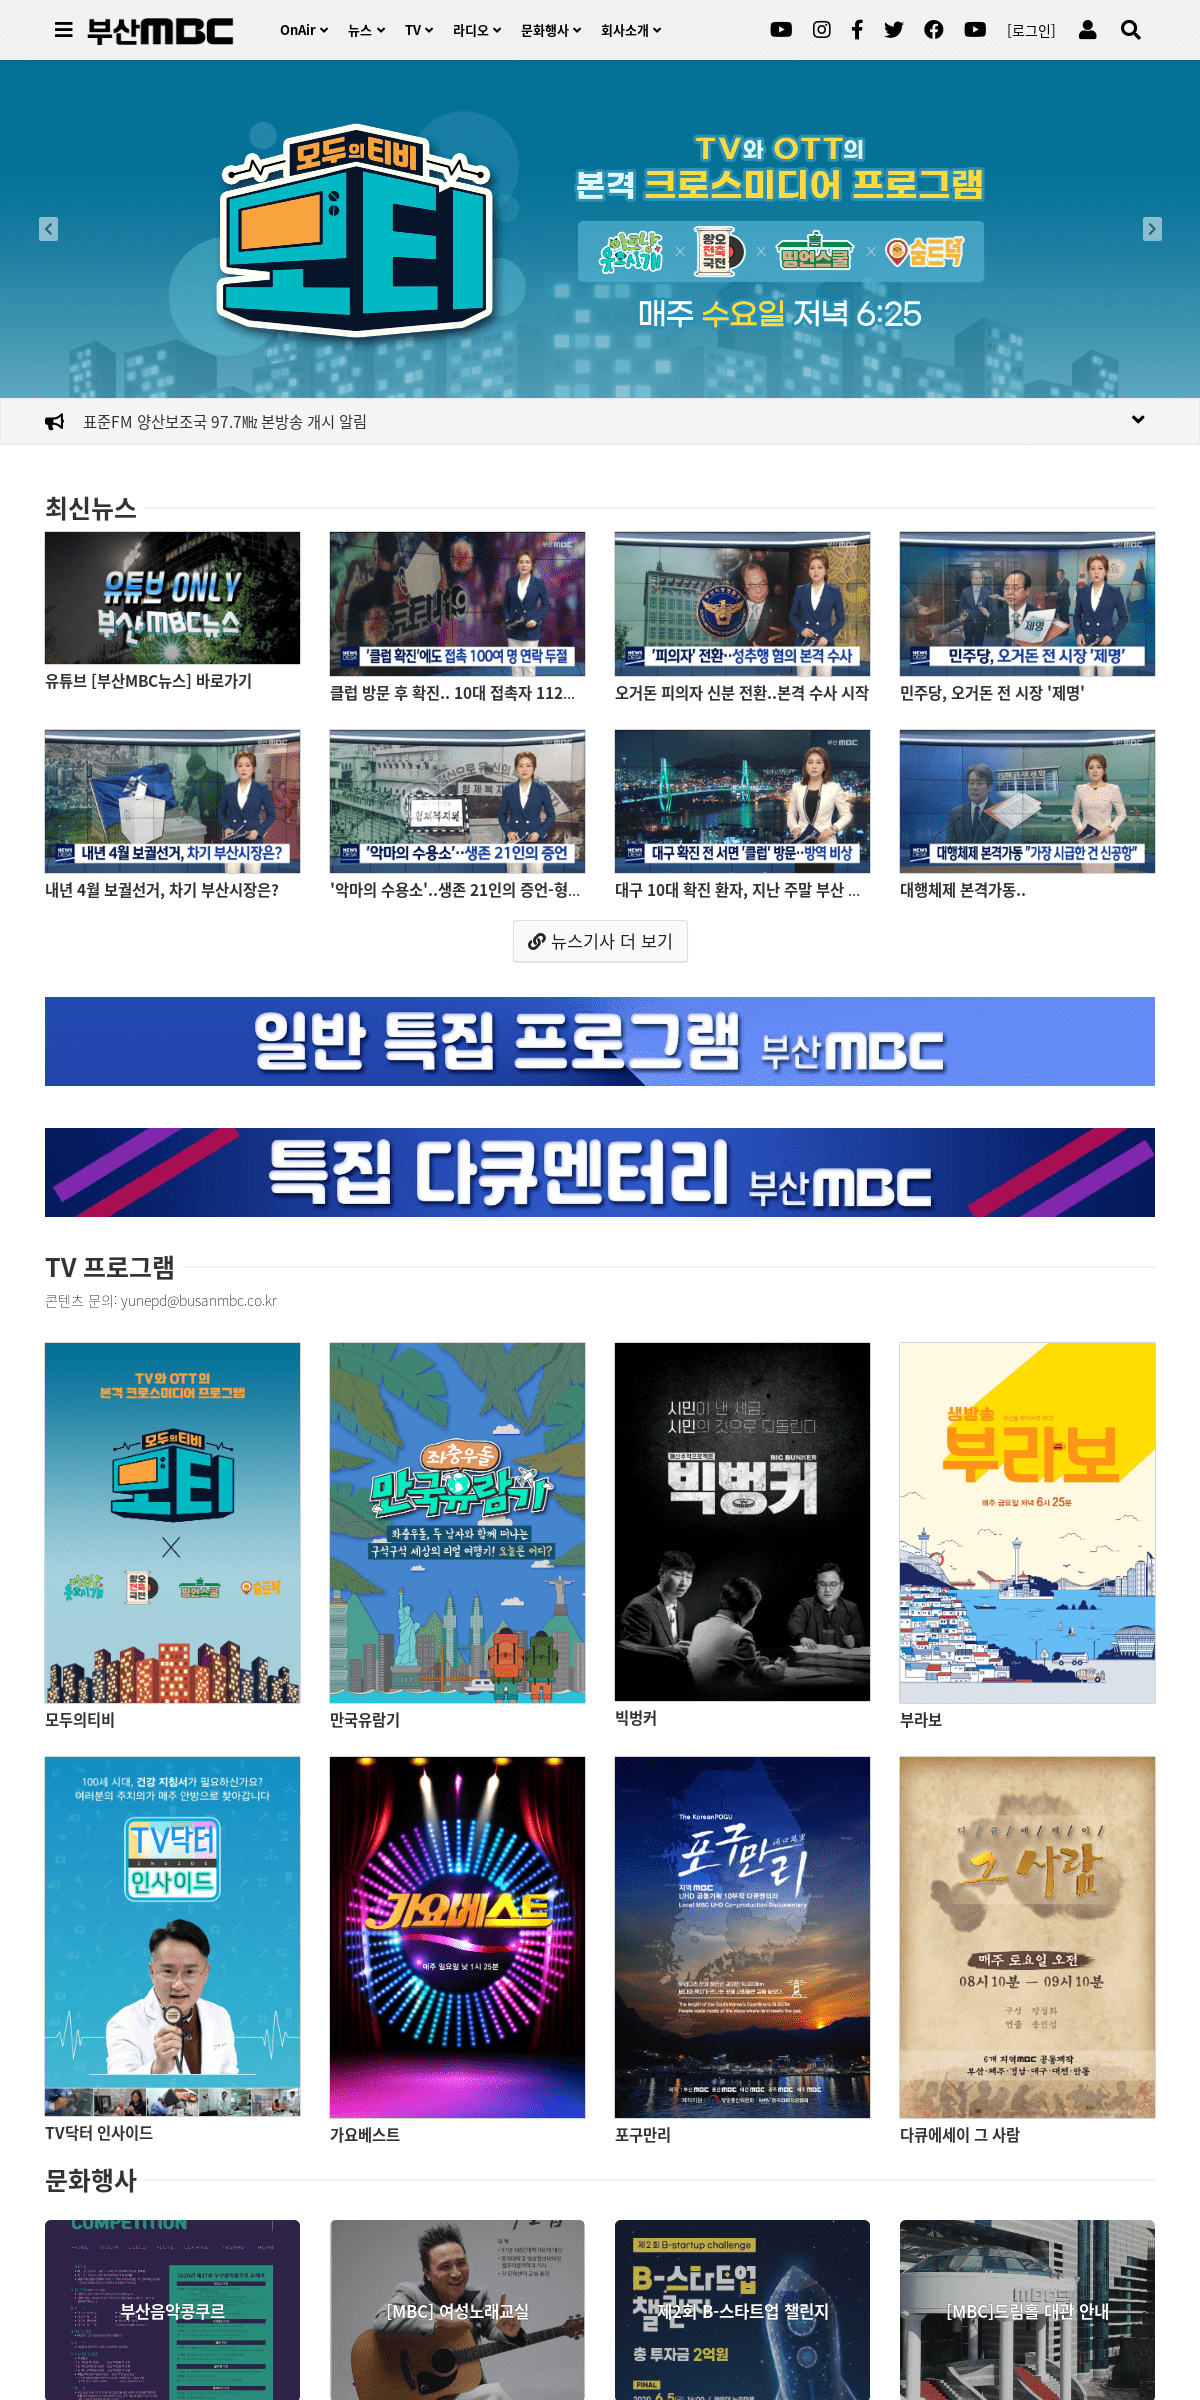 A complete backup of busanmbc.co.kr